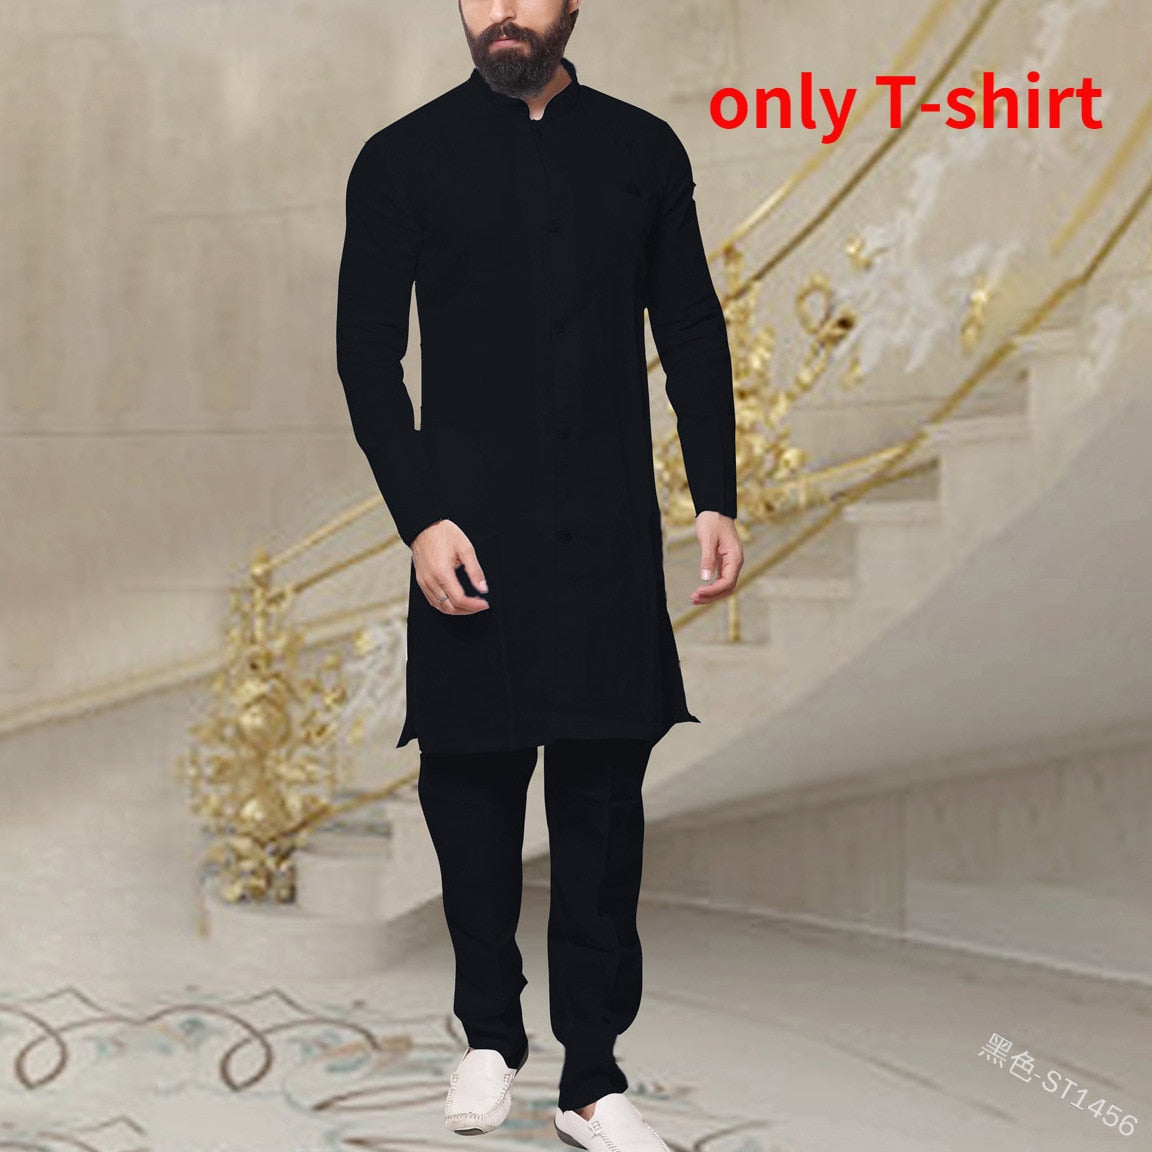 Men Fashion African Clothes Cotton T-shirt Dubai Muslim Long Sleeve Tee Tops Islamic Clothing Set Arabic Casual Blouse Robe Gown voguable